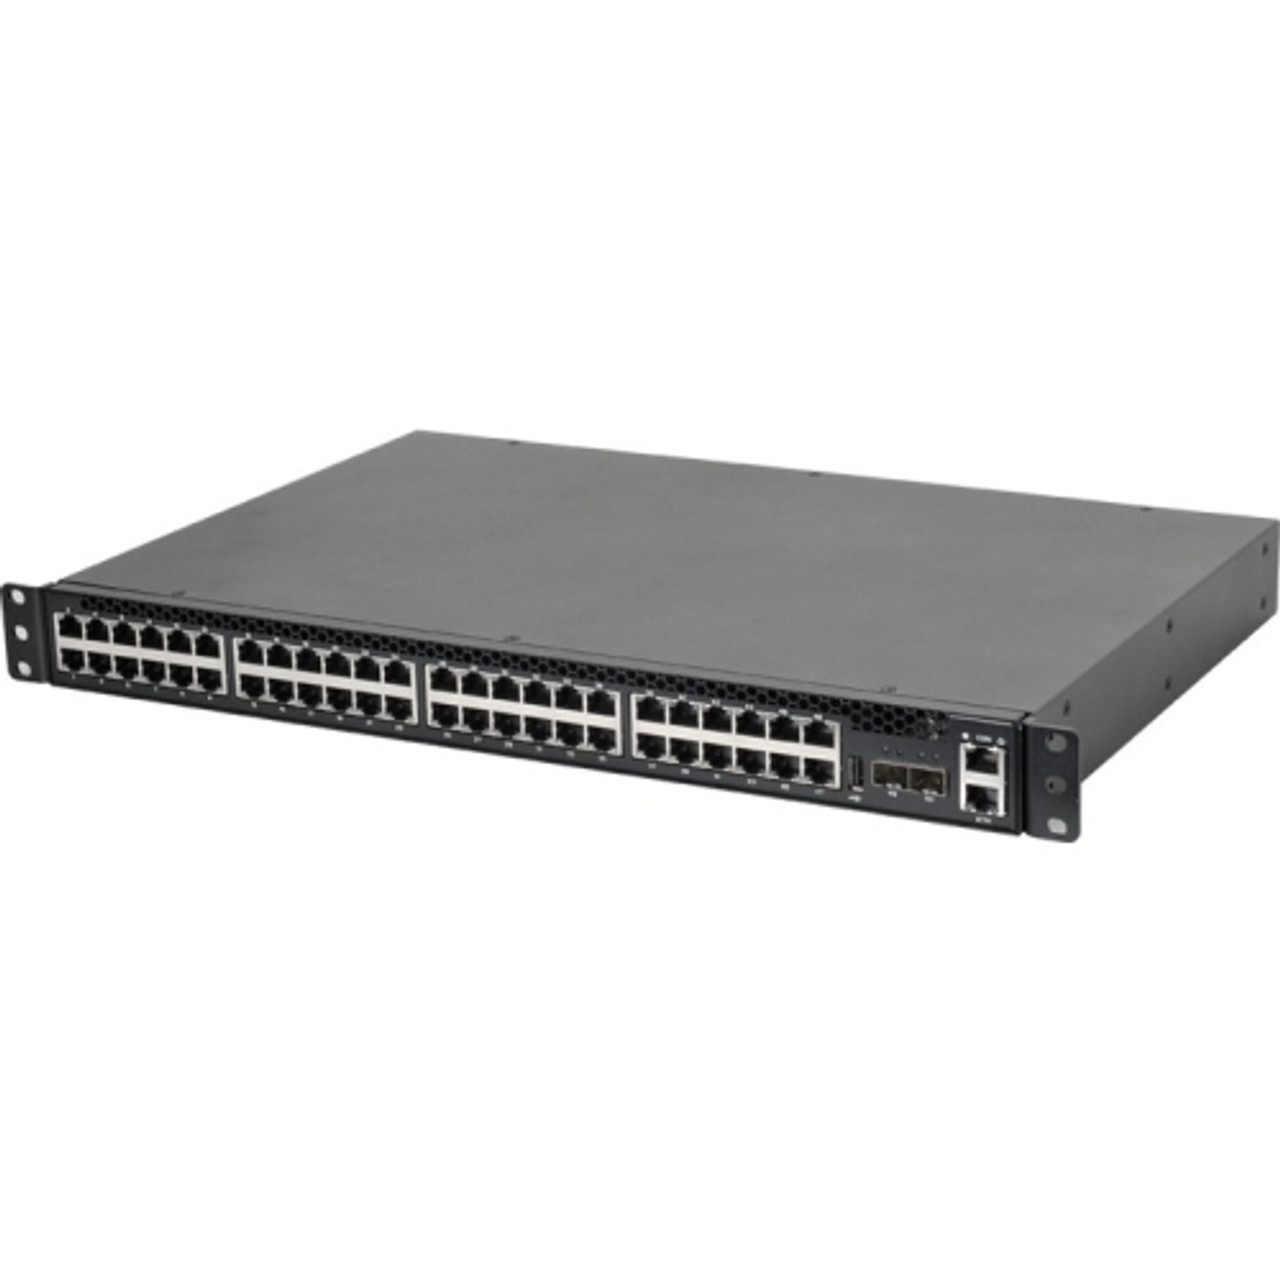 1LY4AZZ0ST0 Quanta 1G/10G Enterprise-Class Ethernet Switch 48 Network, 4 Expansion Slot Manageable Twisted Pair, Optical Fiber Modular 4 Layer Supported